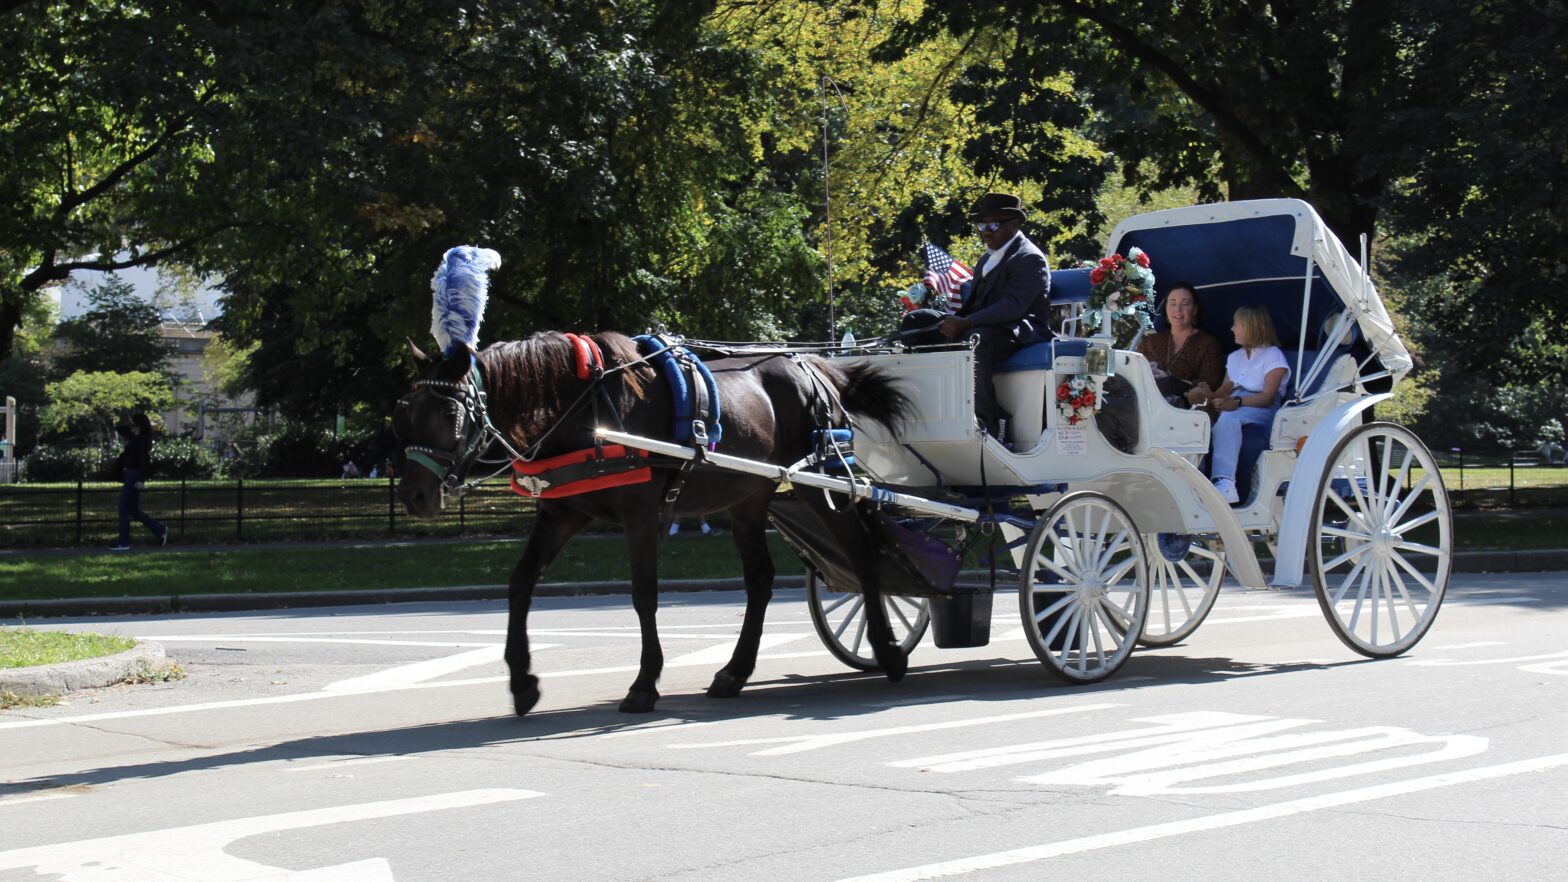 An extravagantly-dressed horse takes two passengers on a carriage ride through Central Park.